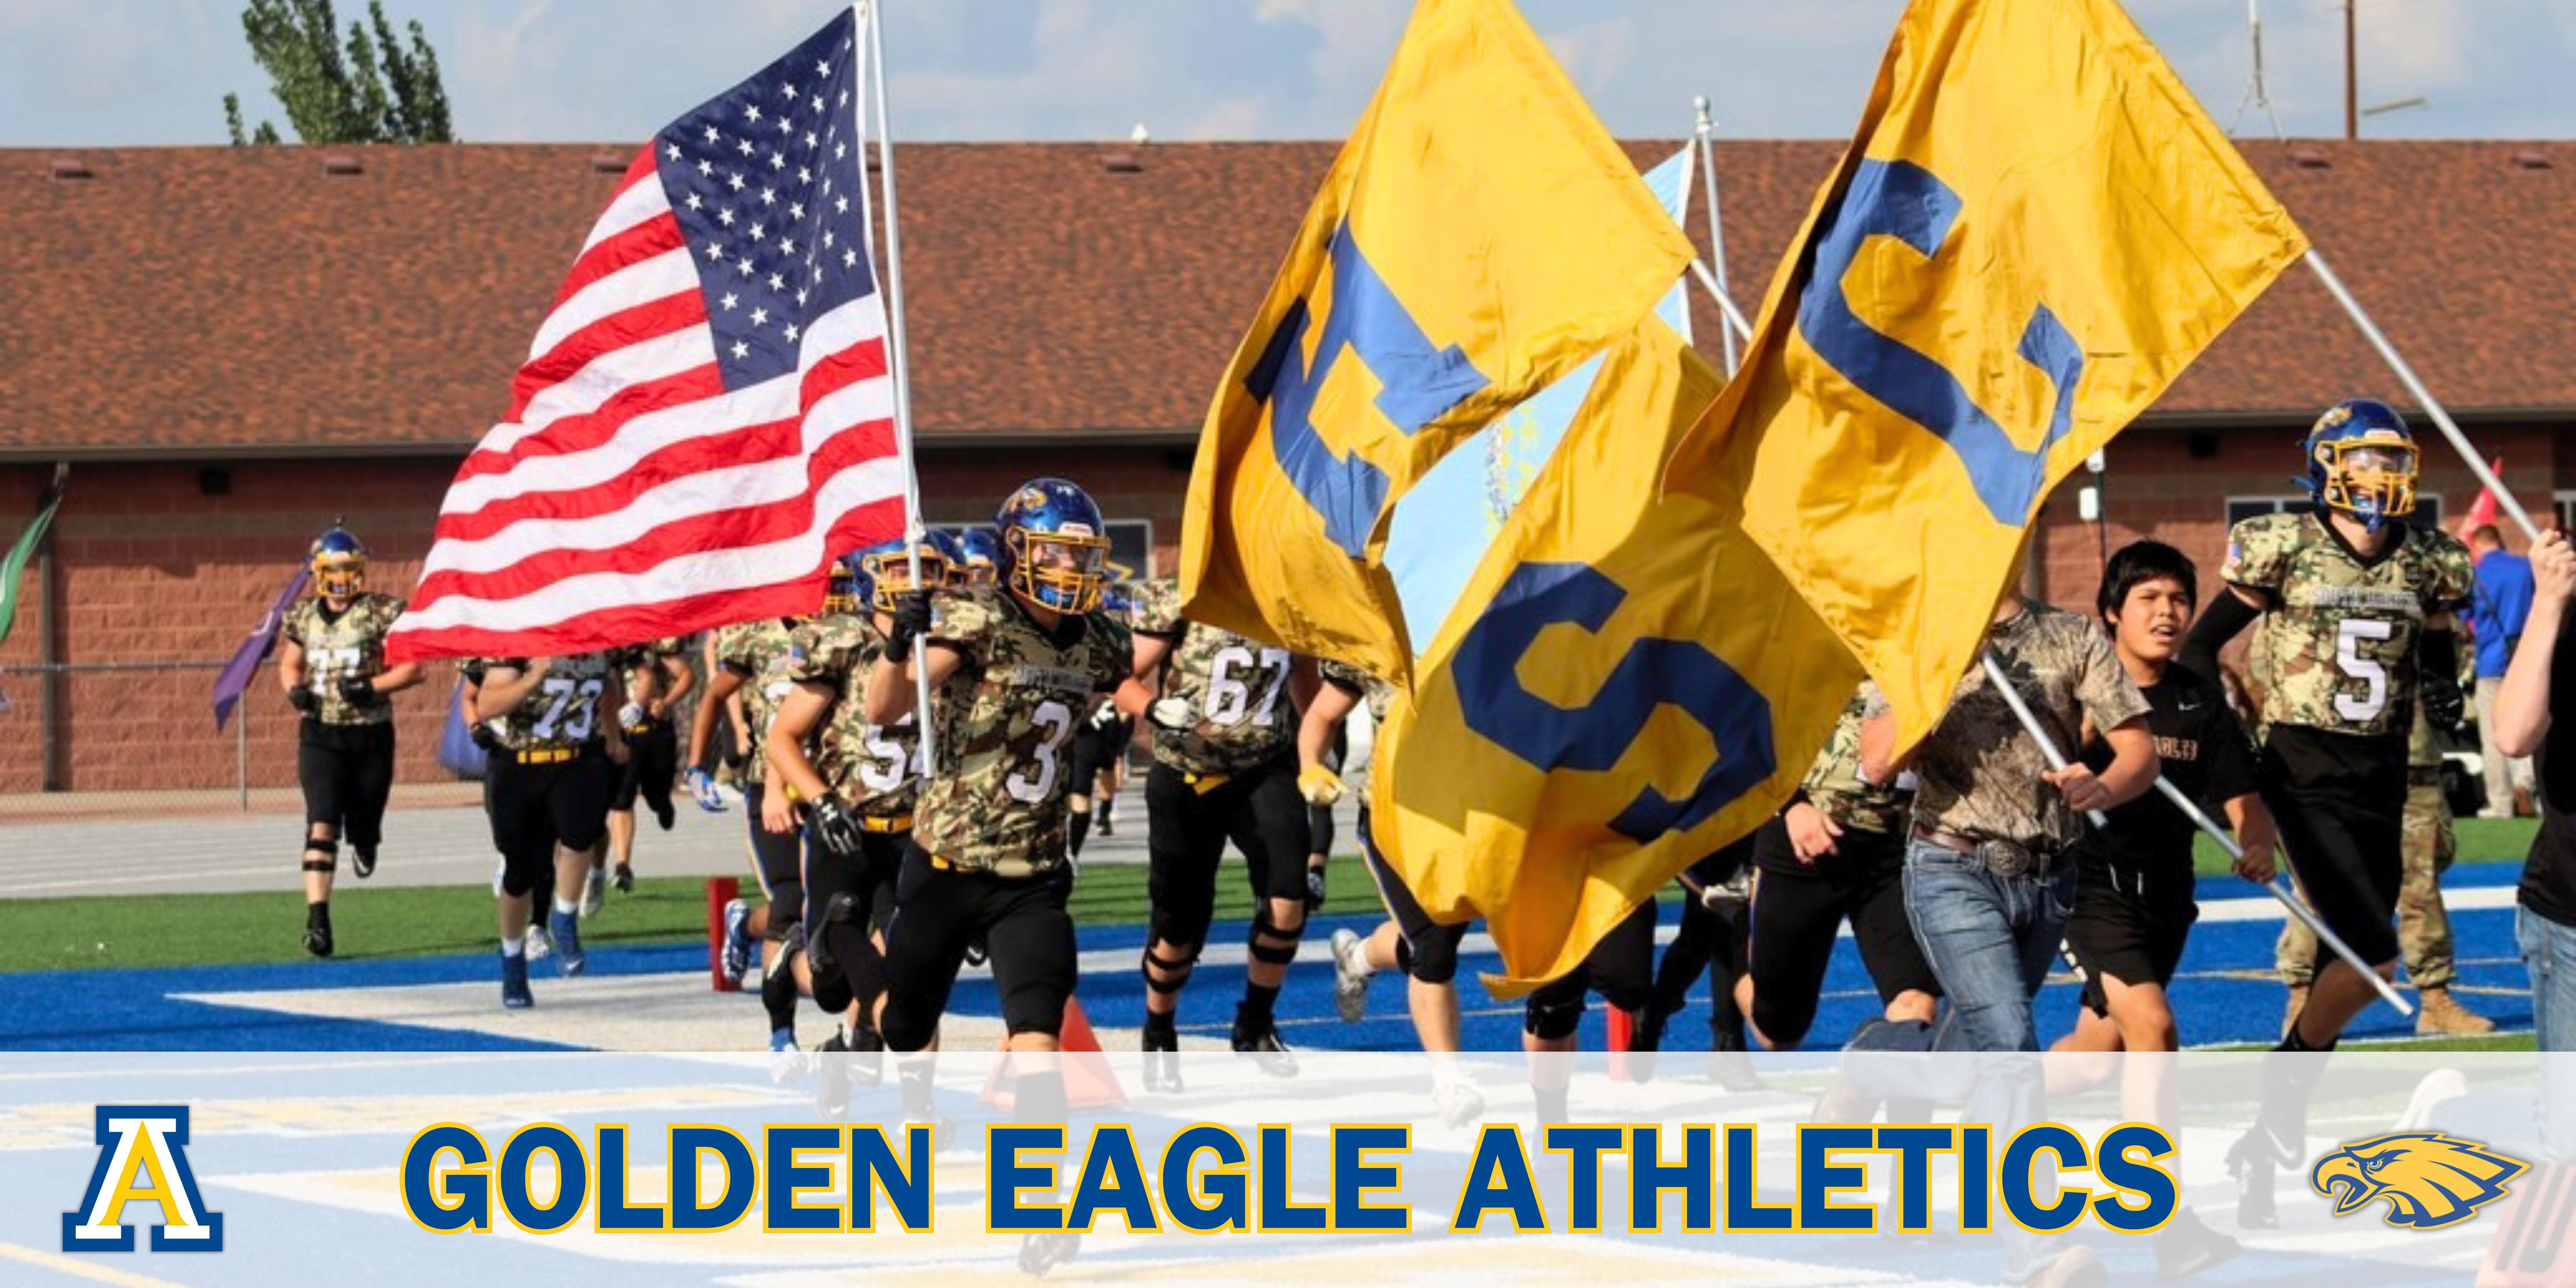 CHS football players holding flags, with text: Golden Eagle Athletics